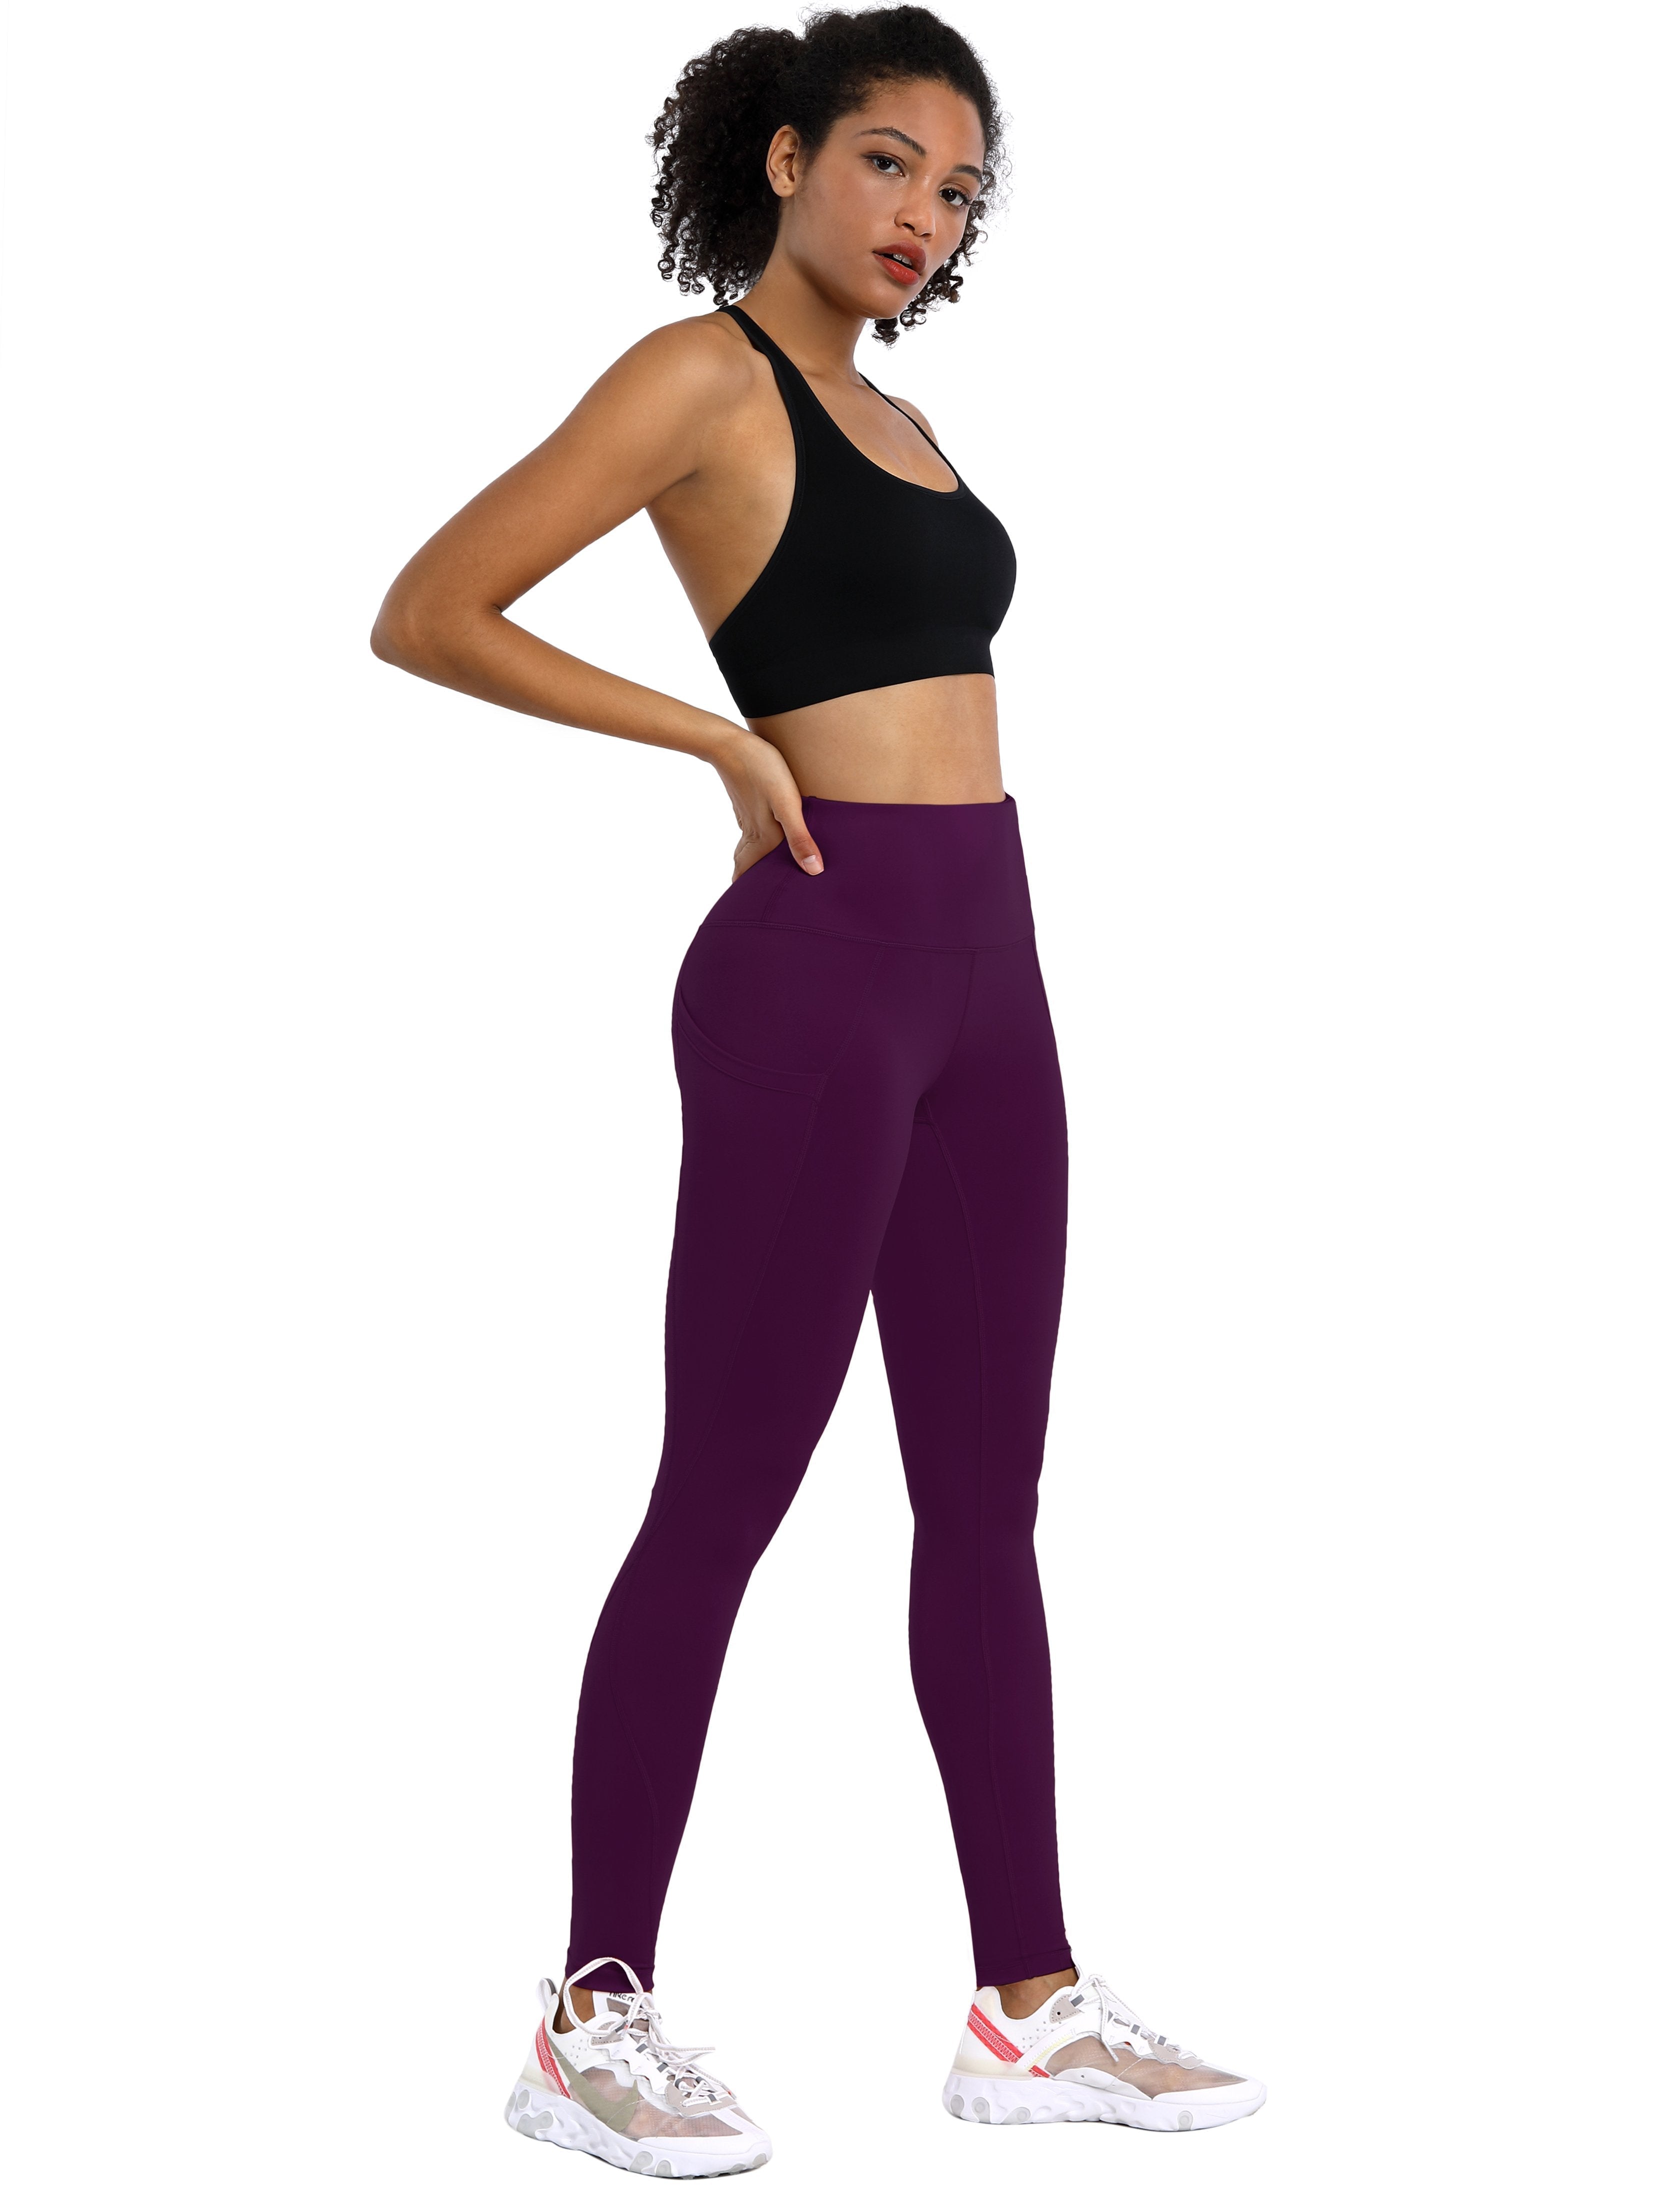 High Waist Side Pockets Tall Size Pants plum 75% Nylon, 25% Spandex Fabric doesn't attract lint easily 4-way stretch No see-through Moisture-wicking Tummy control Inner pocket